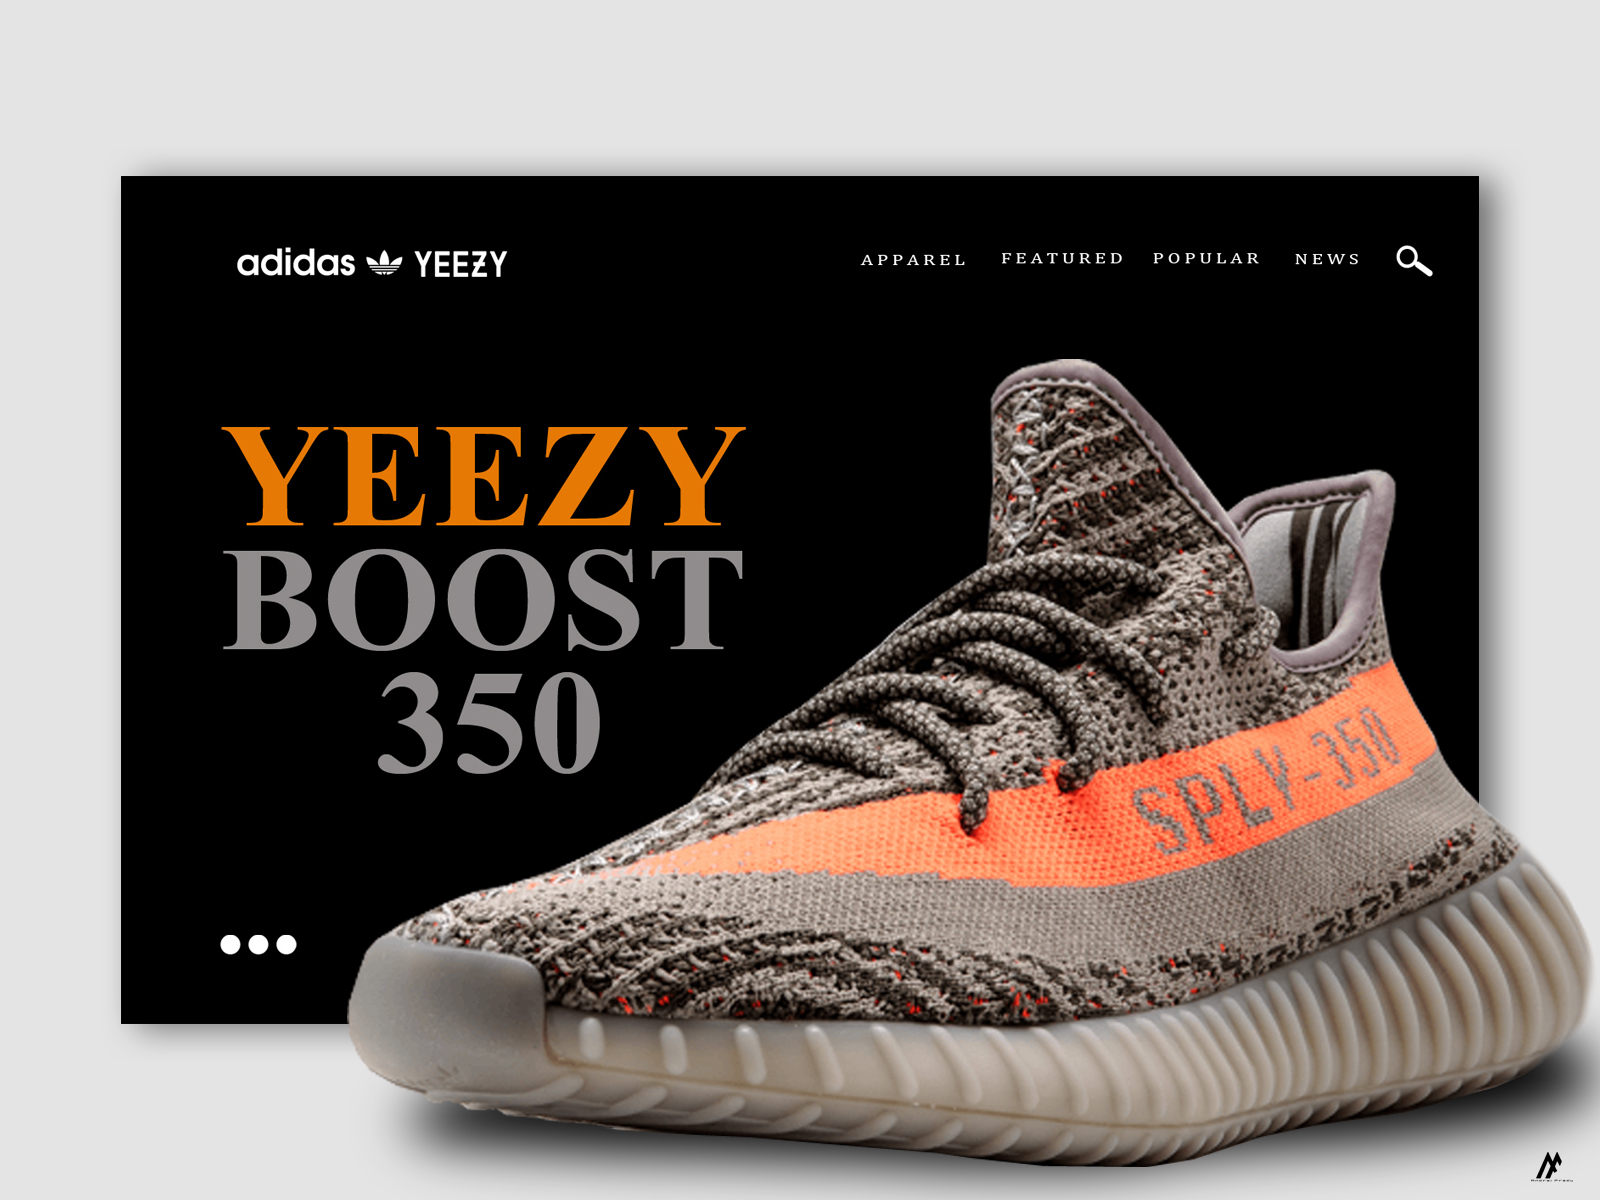 Cheap Adidas Yeezy Boost 350 V2 Light Gy3438 Kanye West